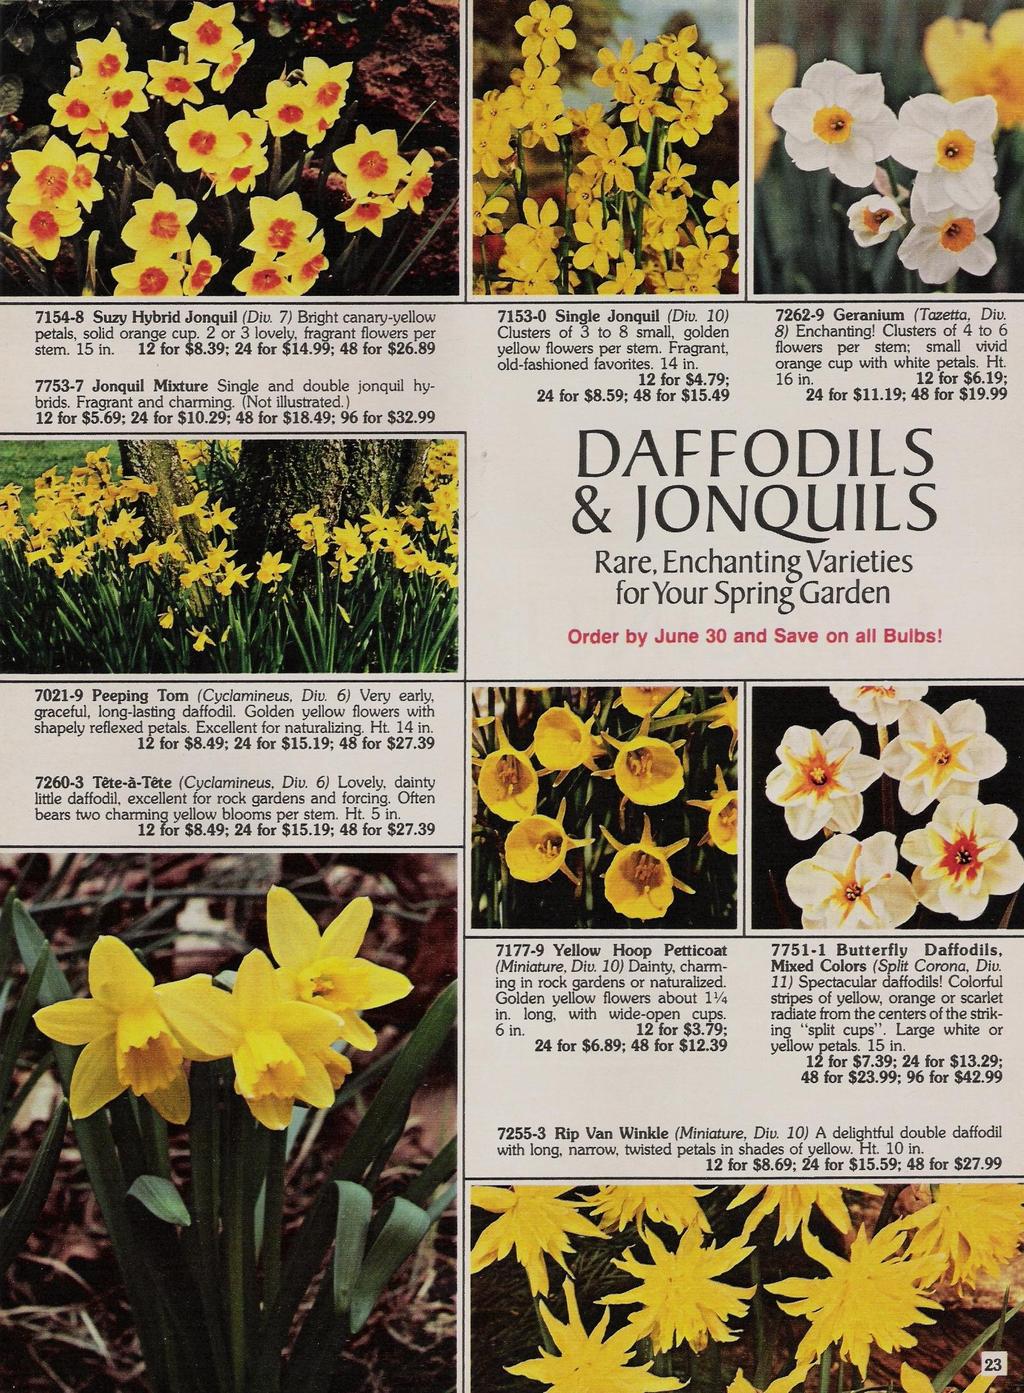 7154-8 Suzy Hybrid Jonquil (Diu. 7) Bright canary-yellow petals, solid orange cup. 2 or 3 lovely, fragrant flowers per stem. 15 in. 12 for $8.39; 24 for $14.99; 48 for $26.